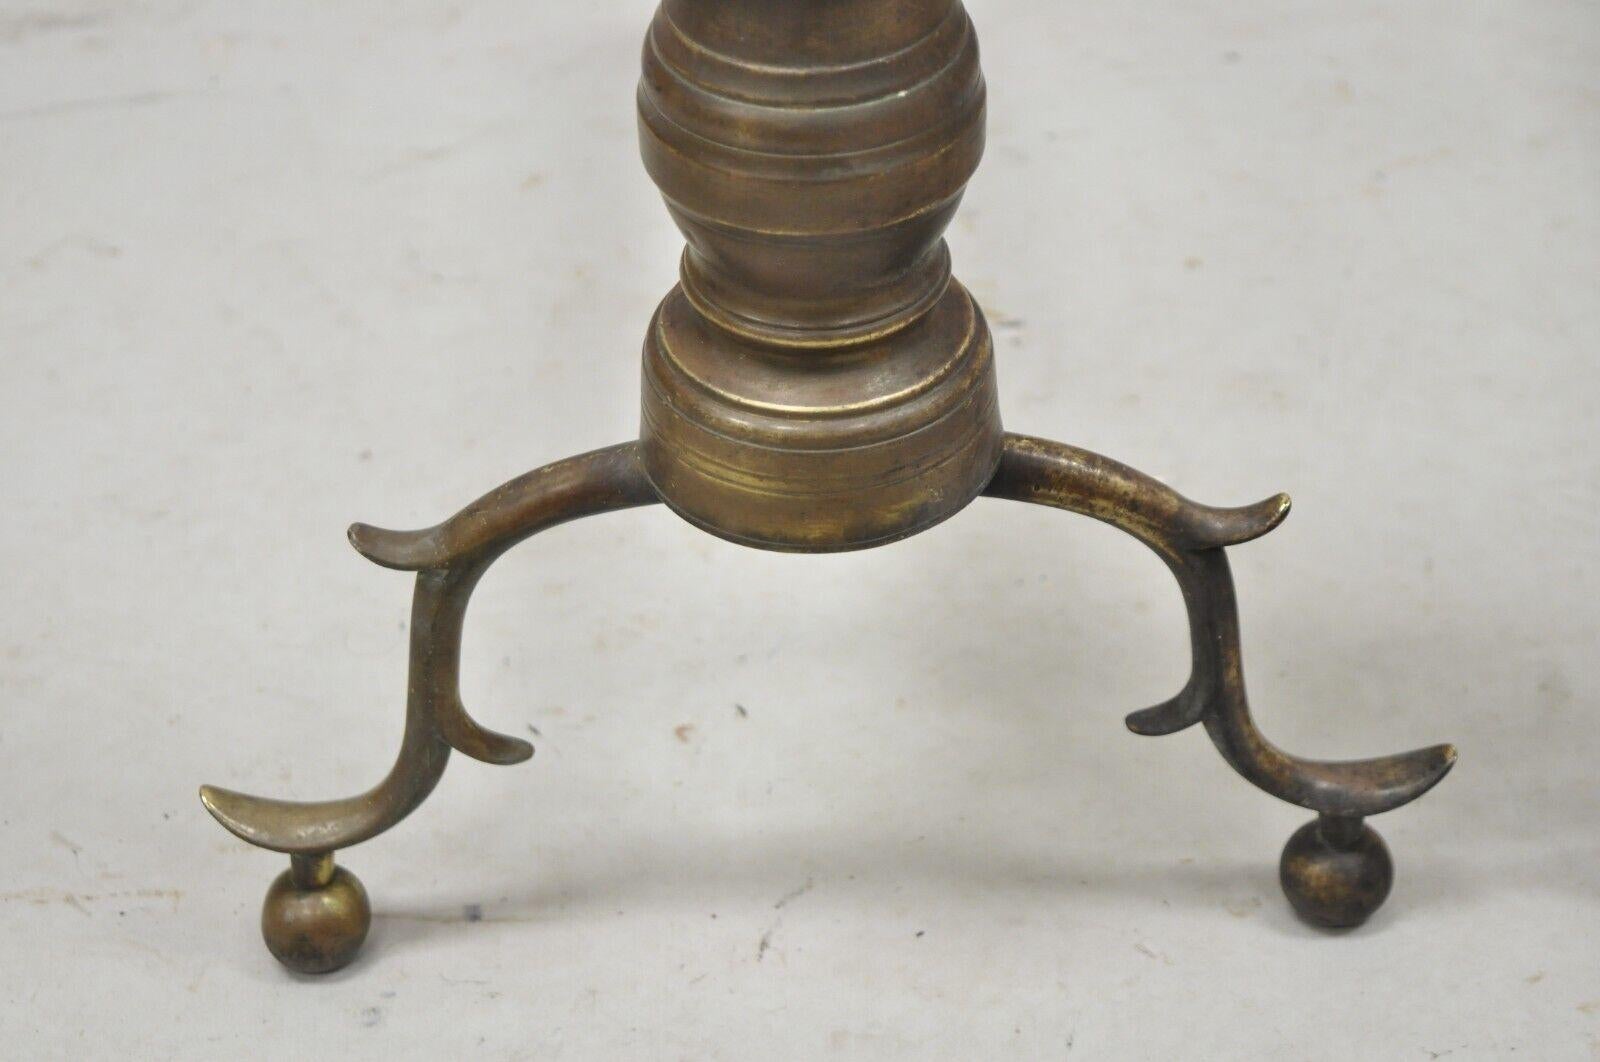 Antique Brass Federal Branch Leg Urn Finial Cast Iron Andirons - a Pair For Sale 5